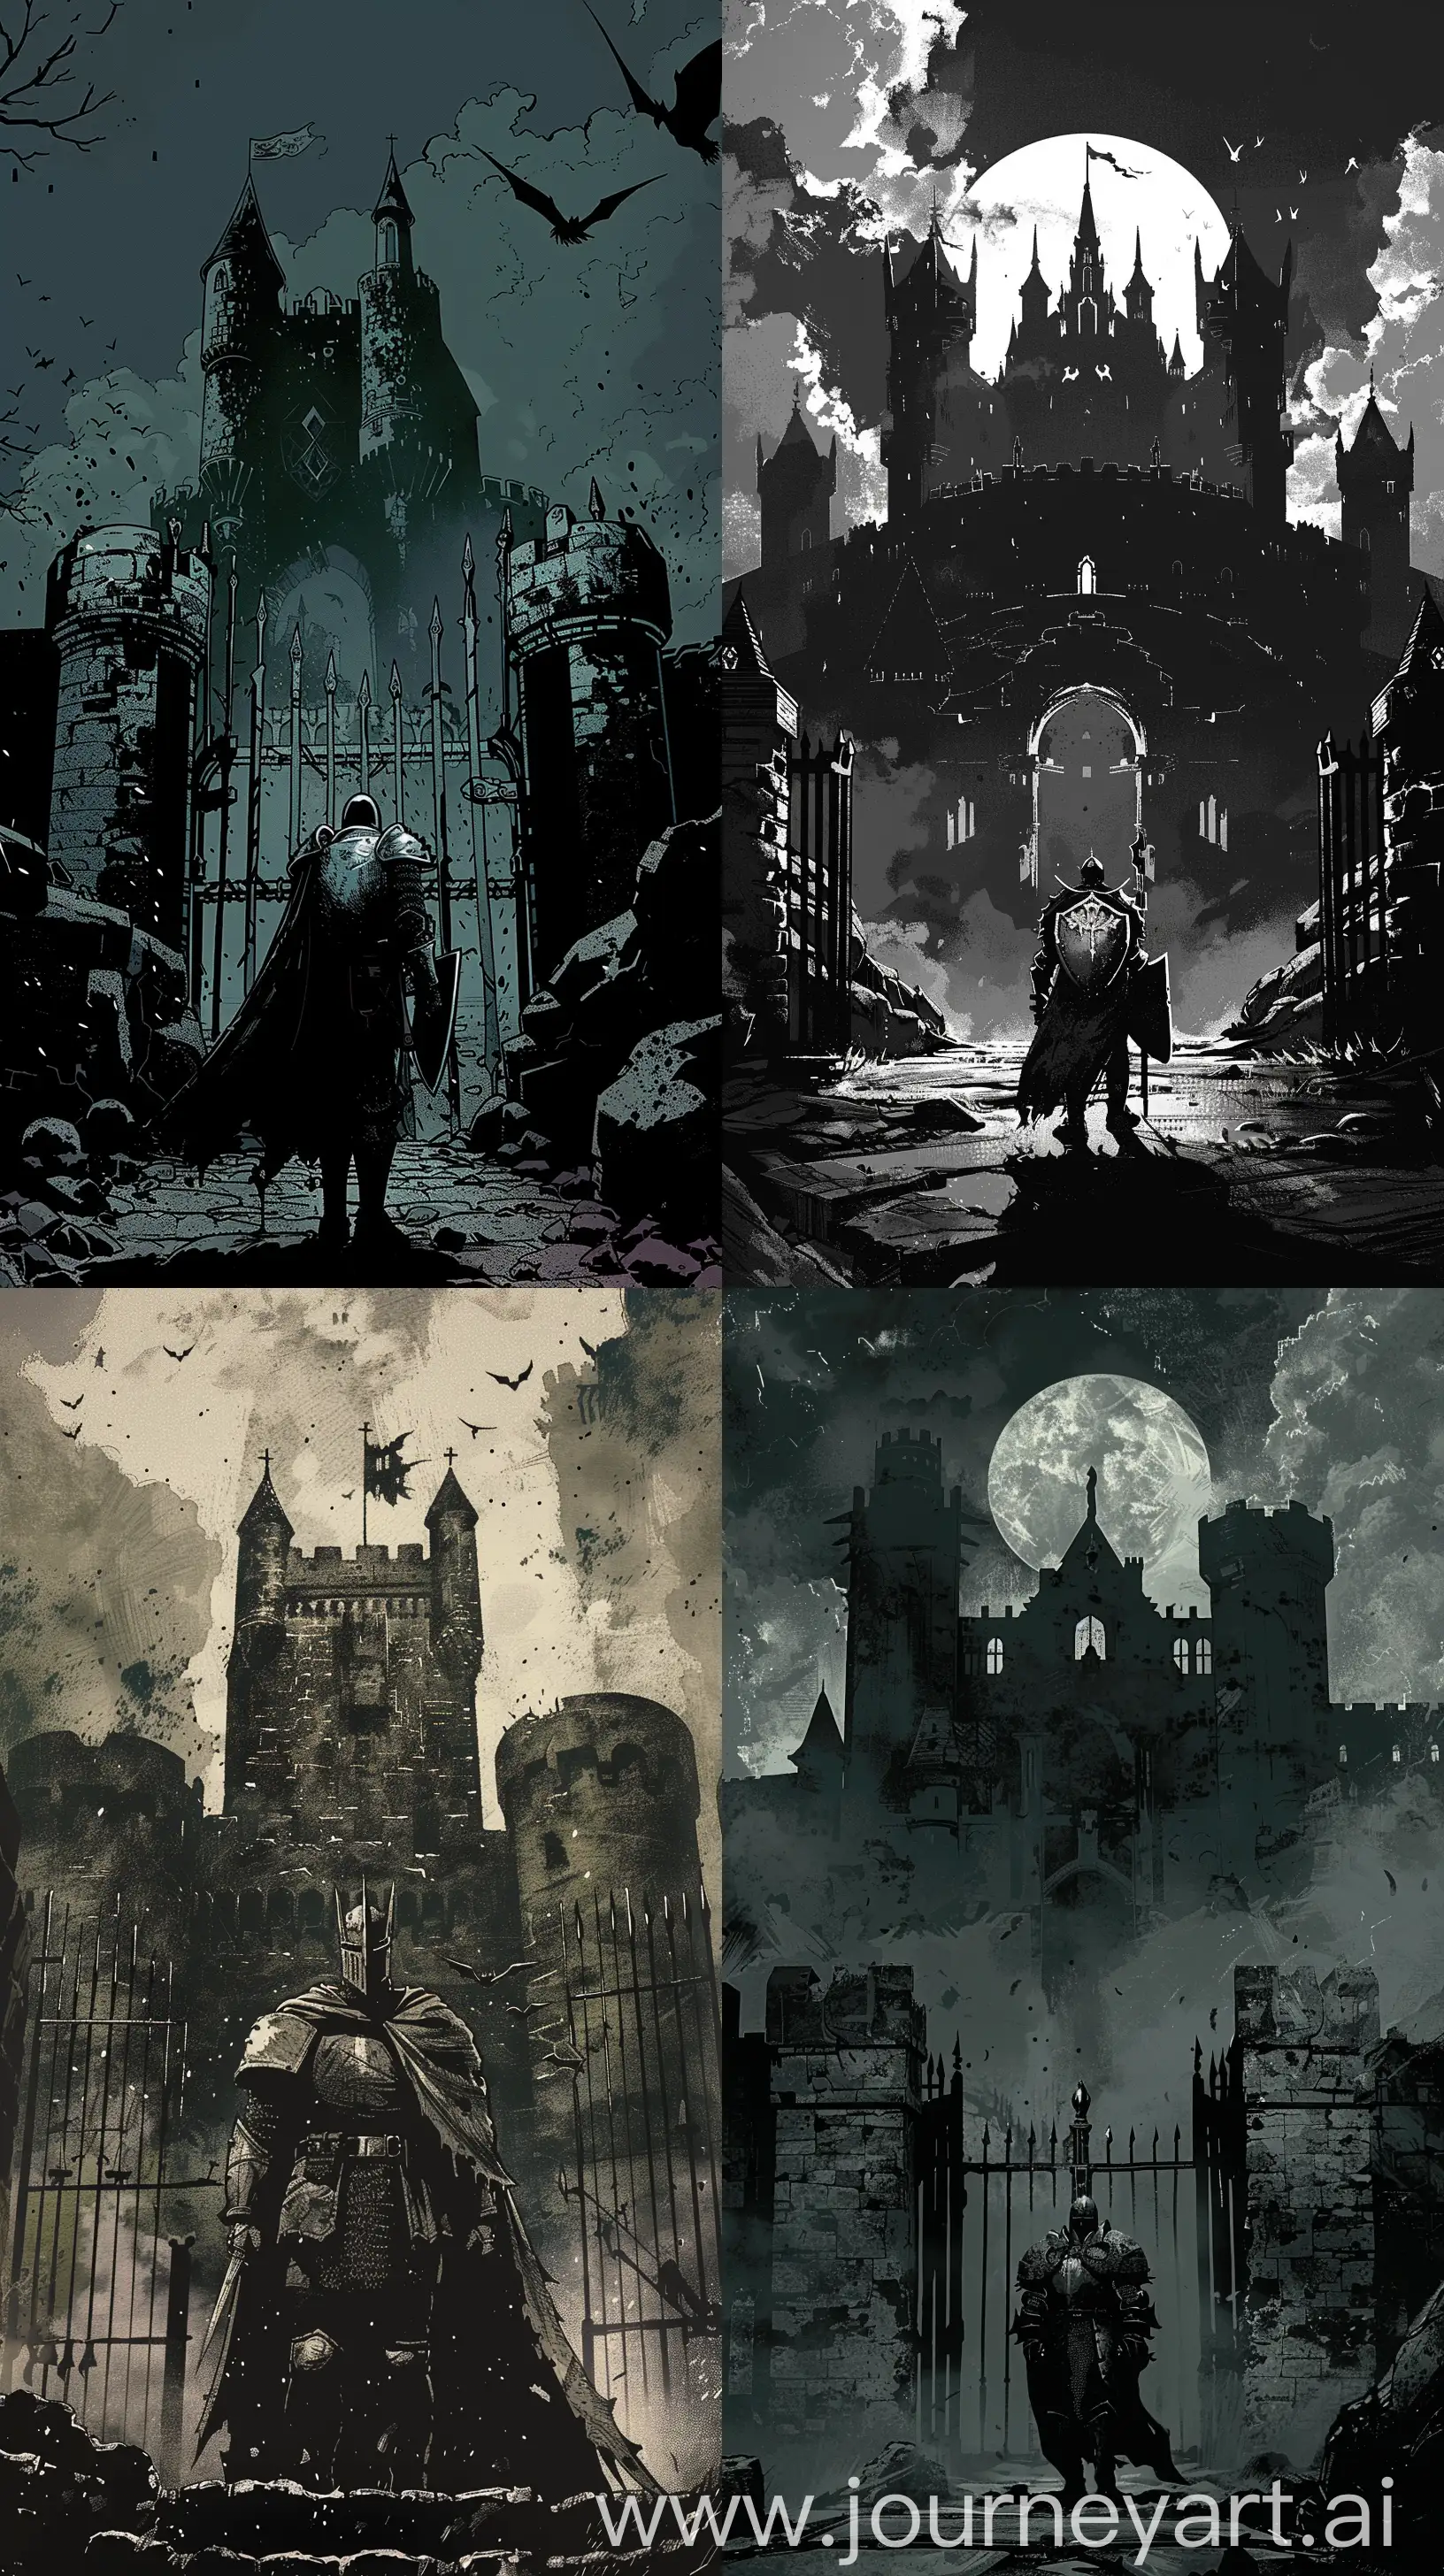 Conjure and capturing the essence of Mike Mignola's art with a lone knight standing at the gates of a foreboding castle, a high-contrast image with dramatic lighting and a moody, monochrome color scheme that highlights the intricate armor design 8k Uhd Maximalist Details, --ar 9:16